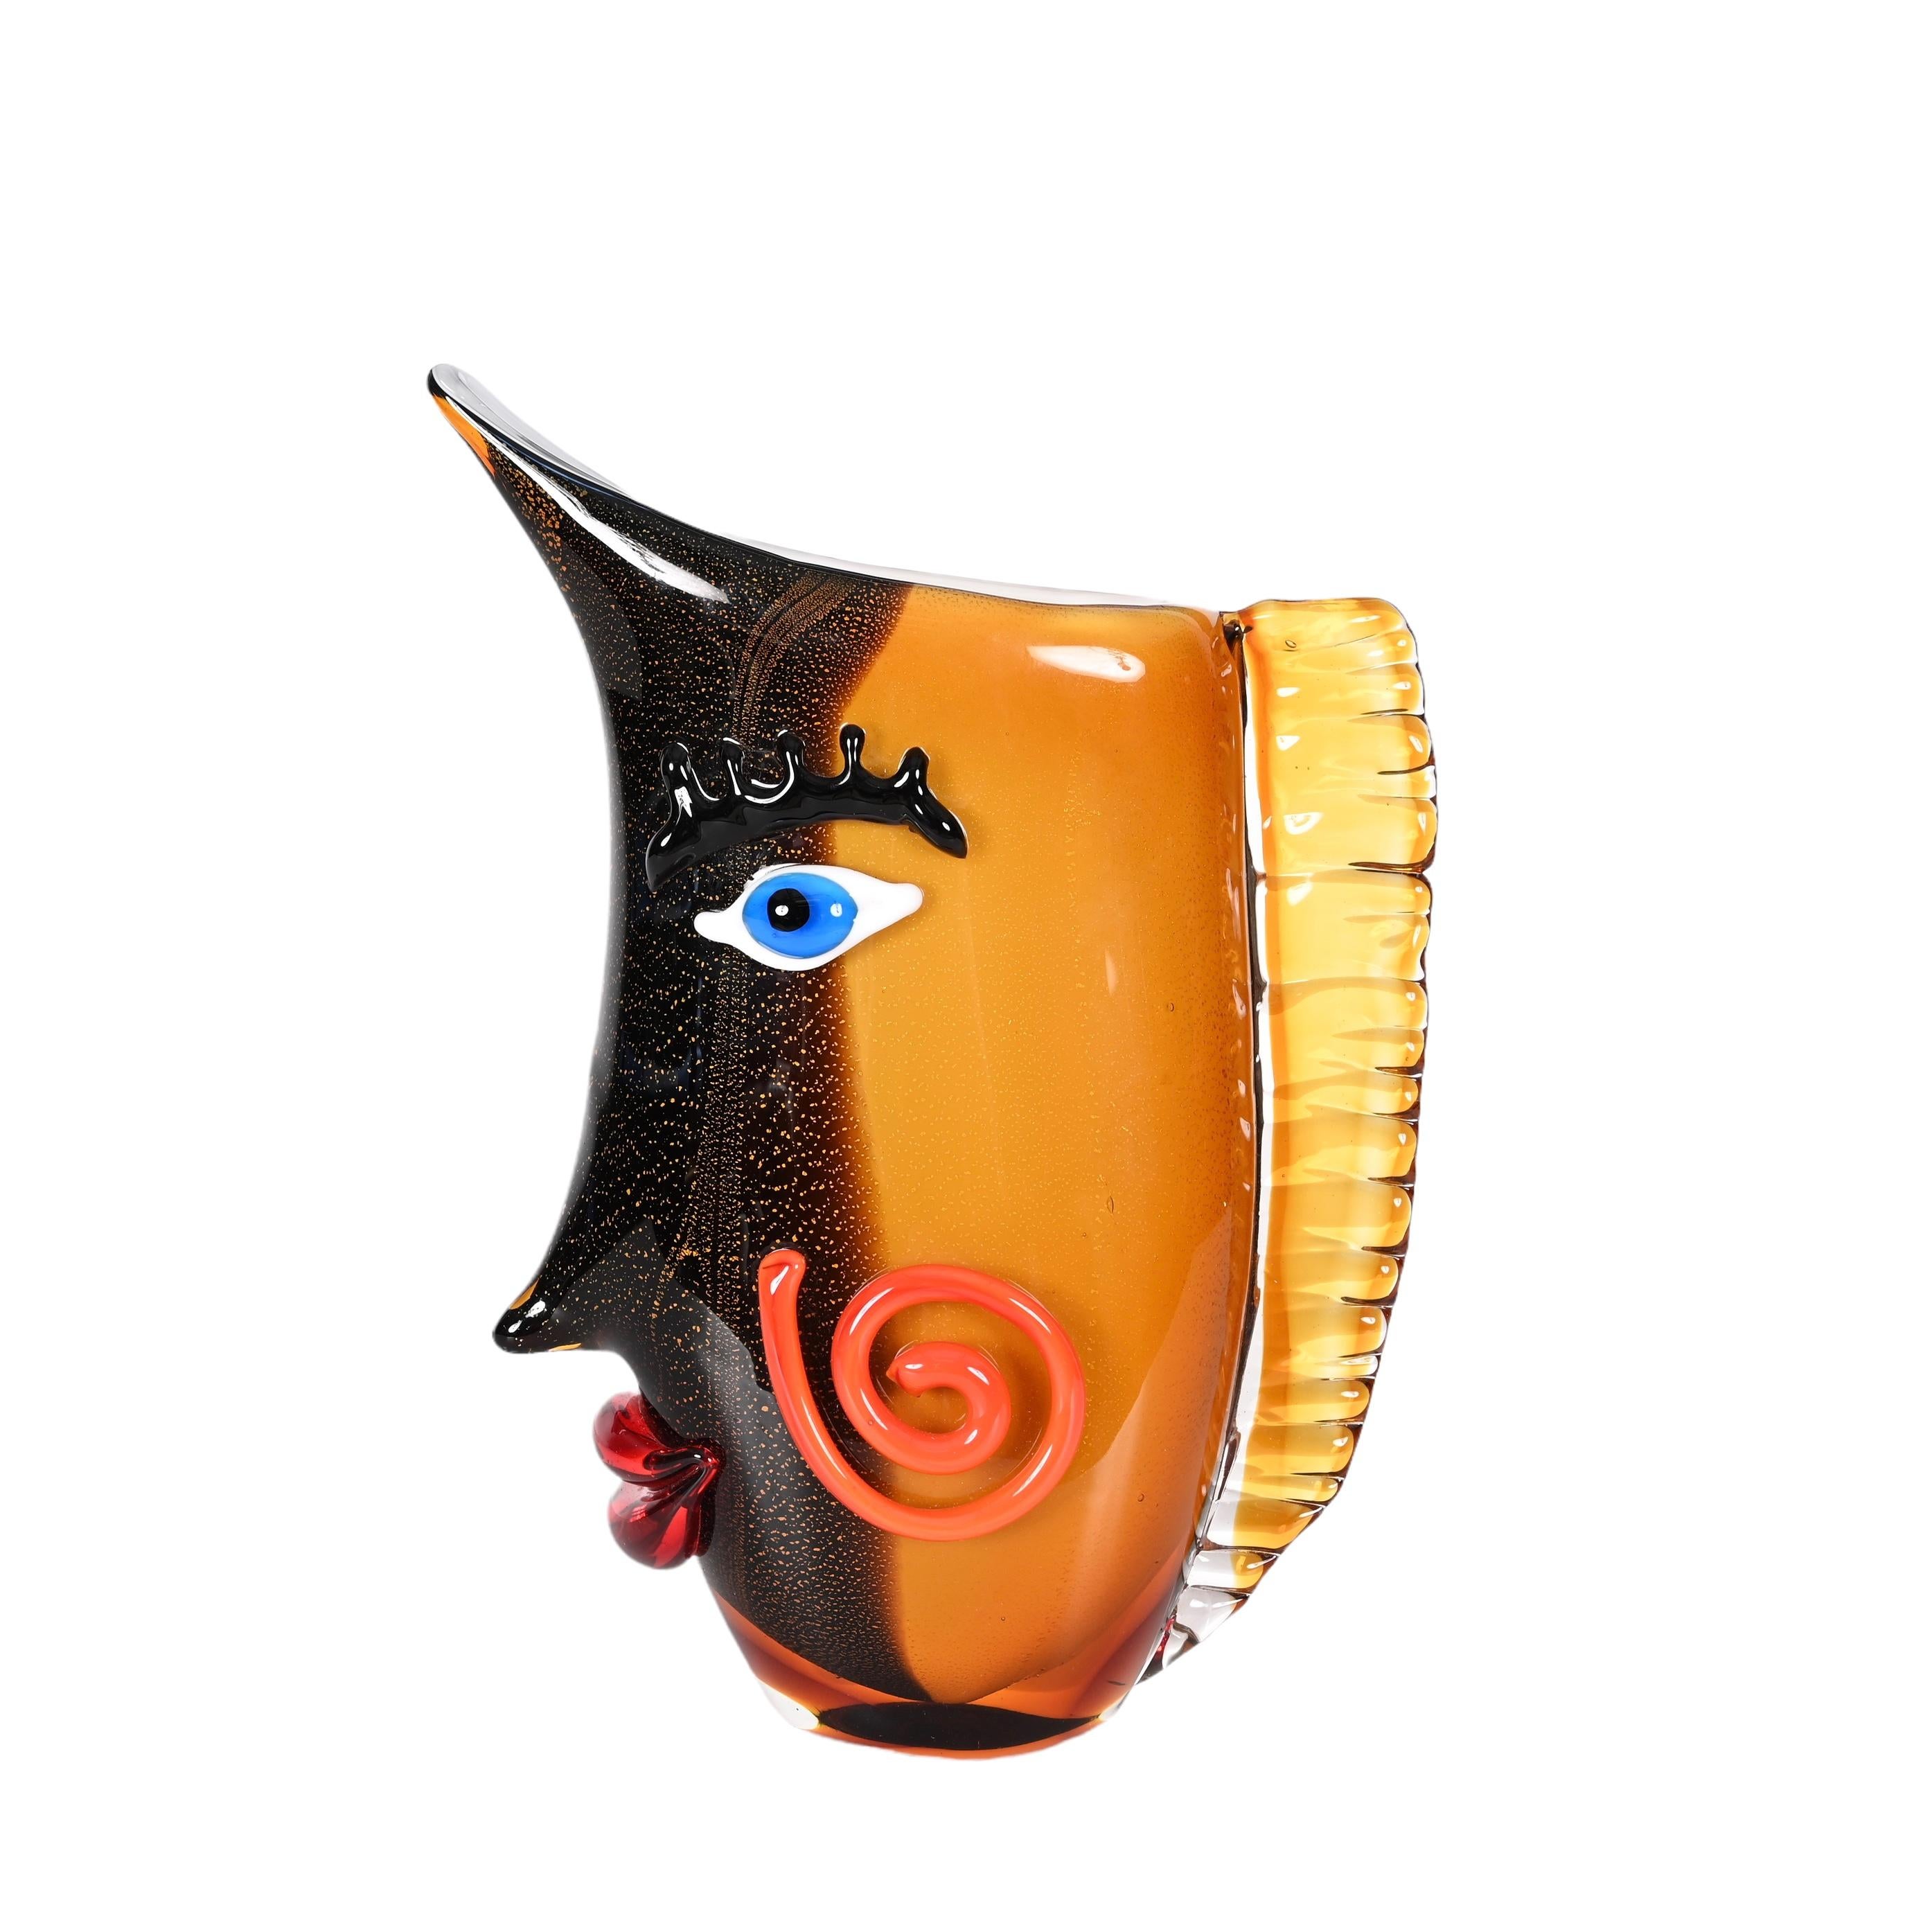 Mario Badioli after Picasso Black and Orange Sommerso Murano Glass Vase, 1980s In Good Condition For Sale In Roma, IT